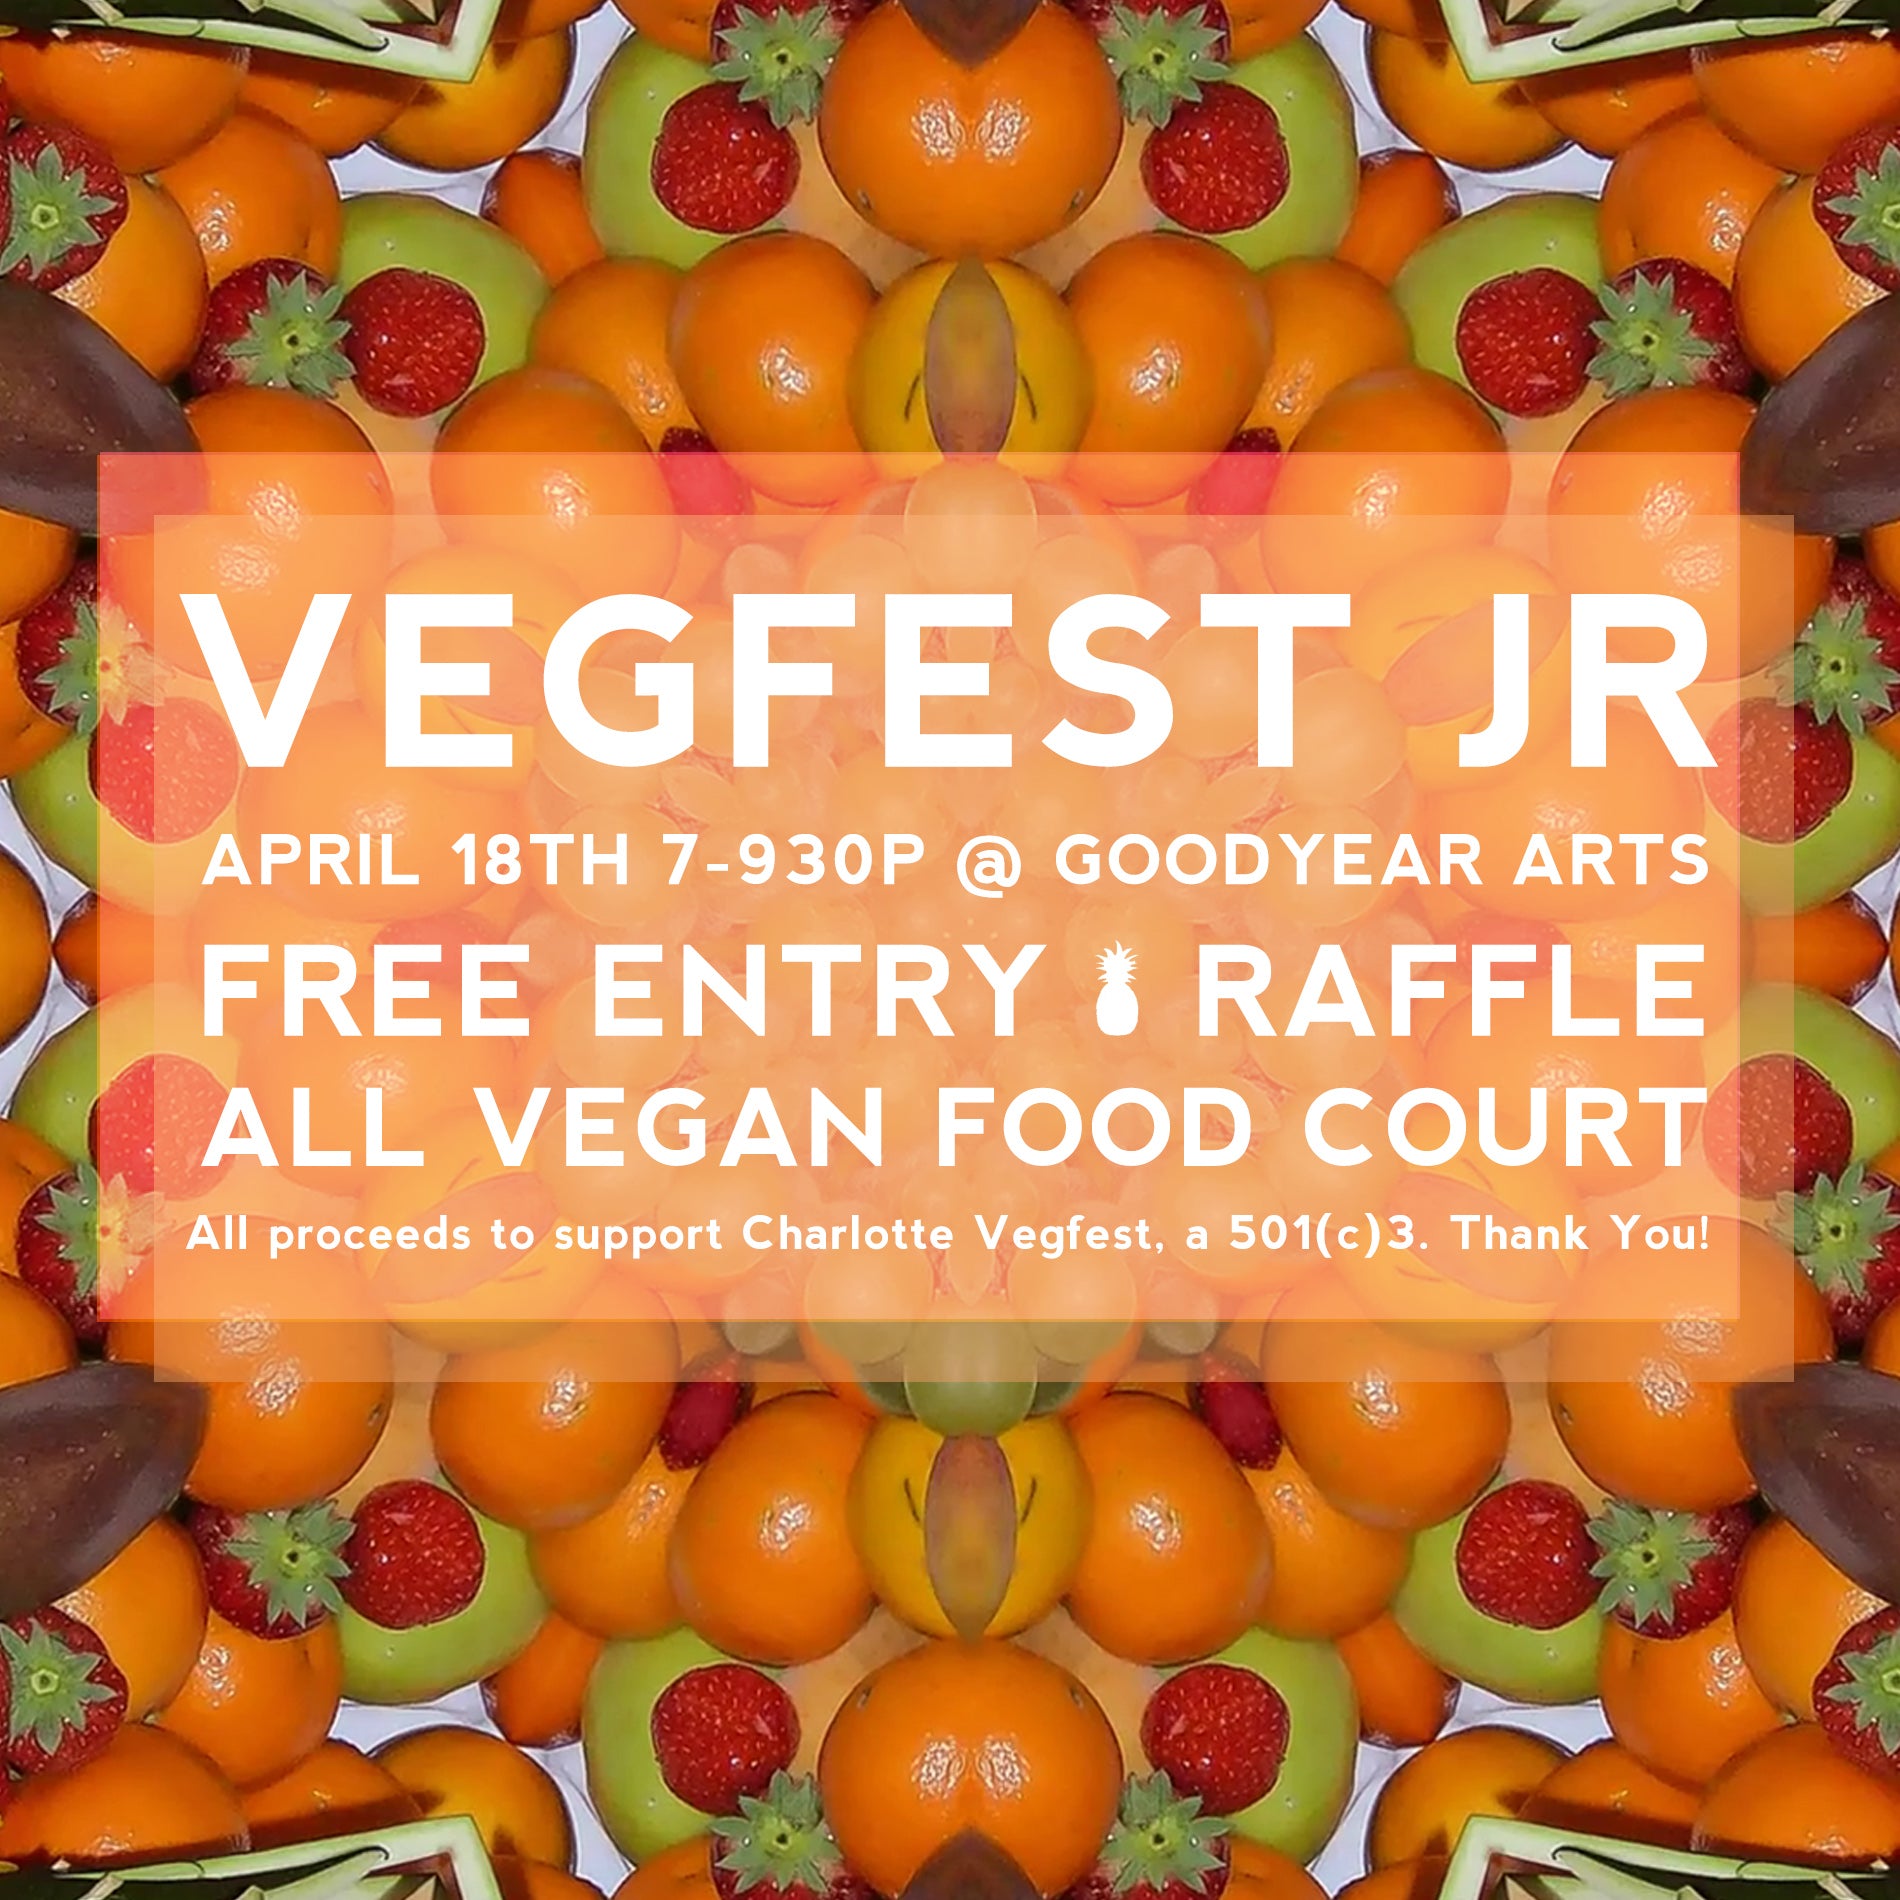 We would love to see you at Vegfest Jr.!